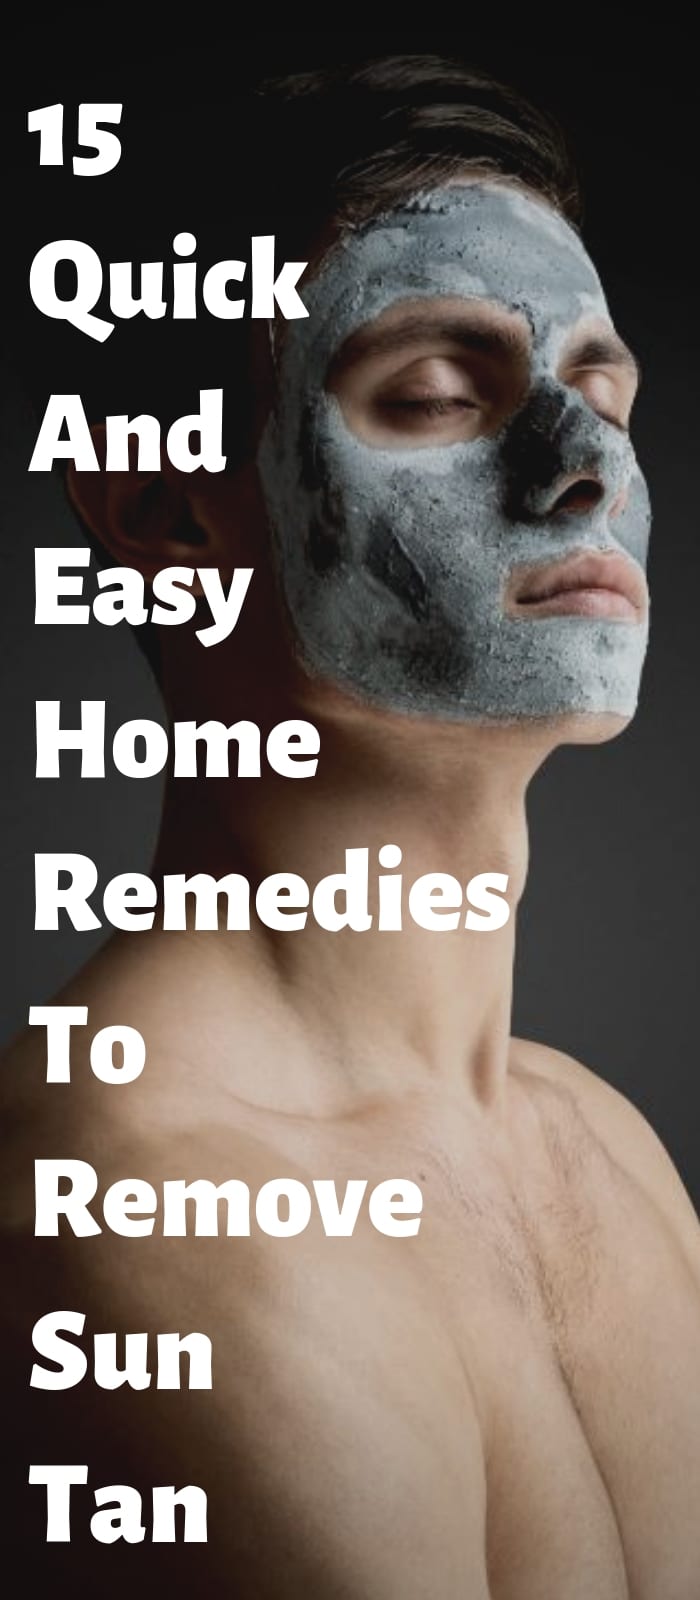 15 Quick And Easy Home Remedies To Remove Sun Tan